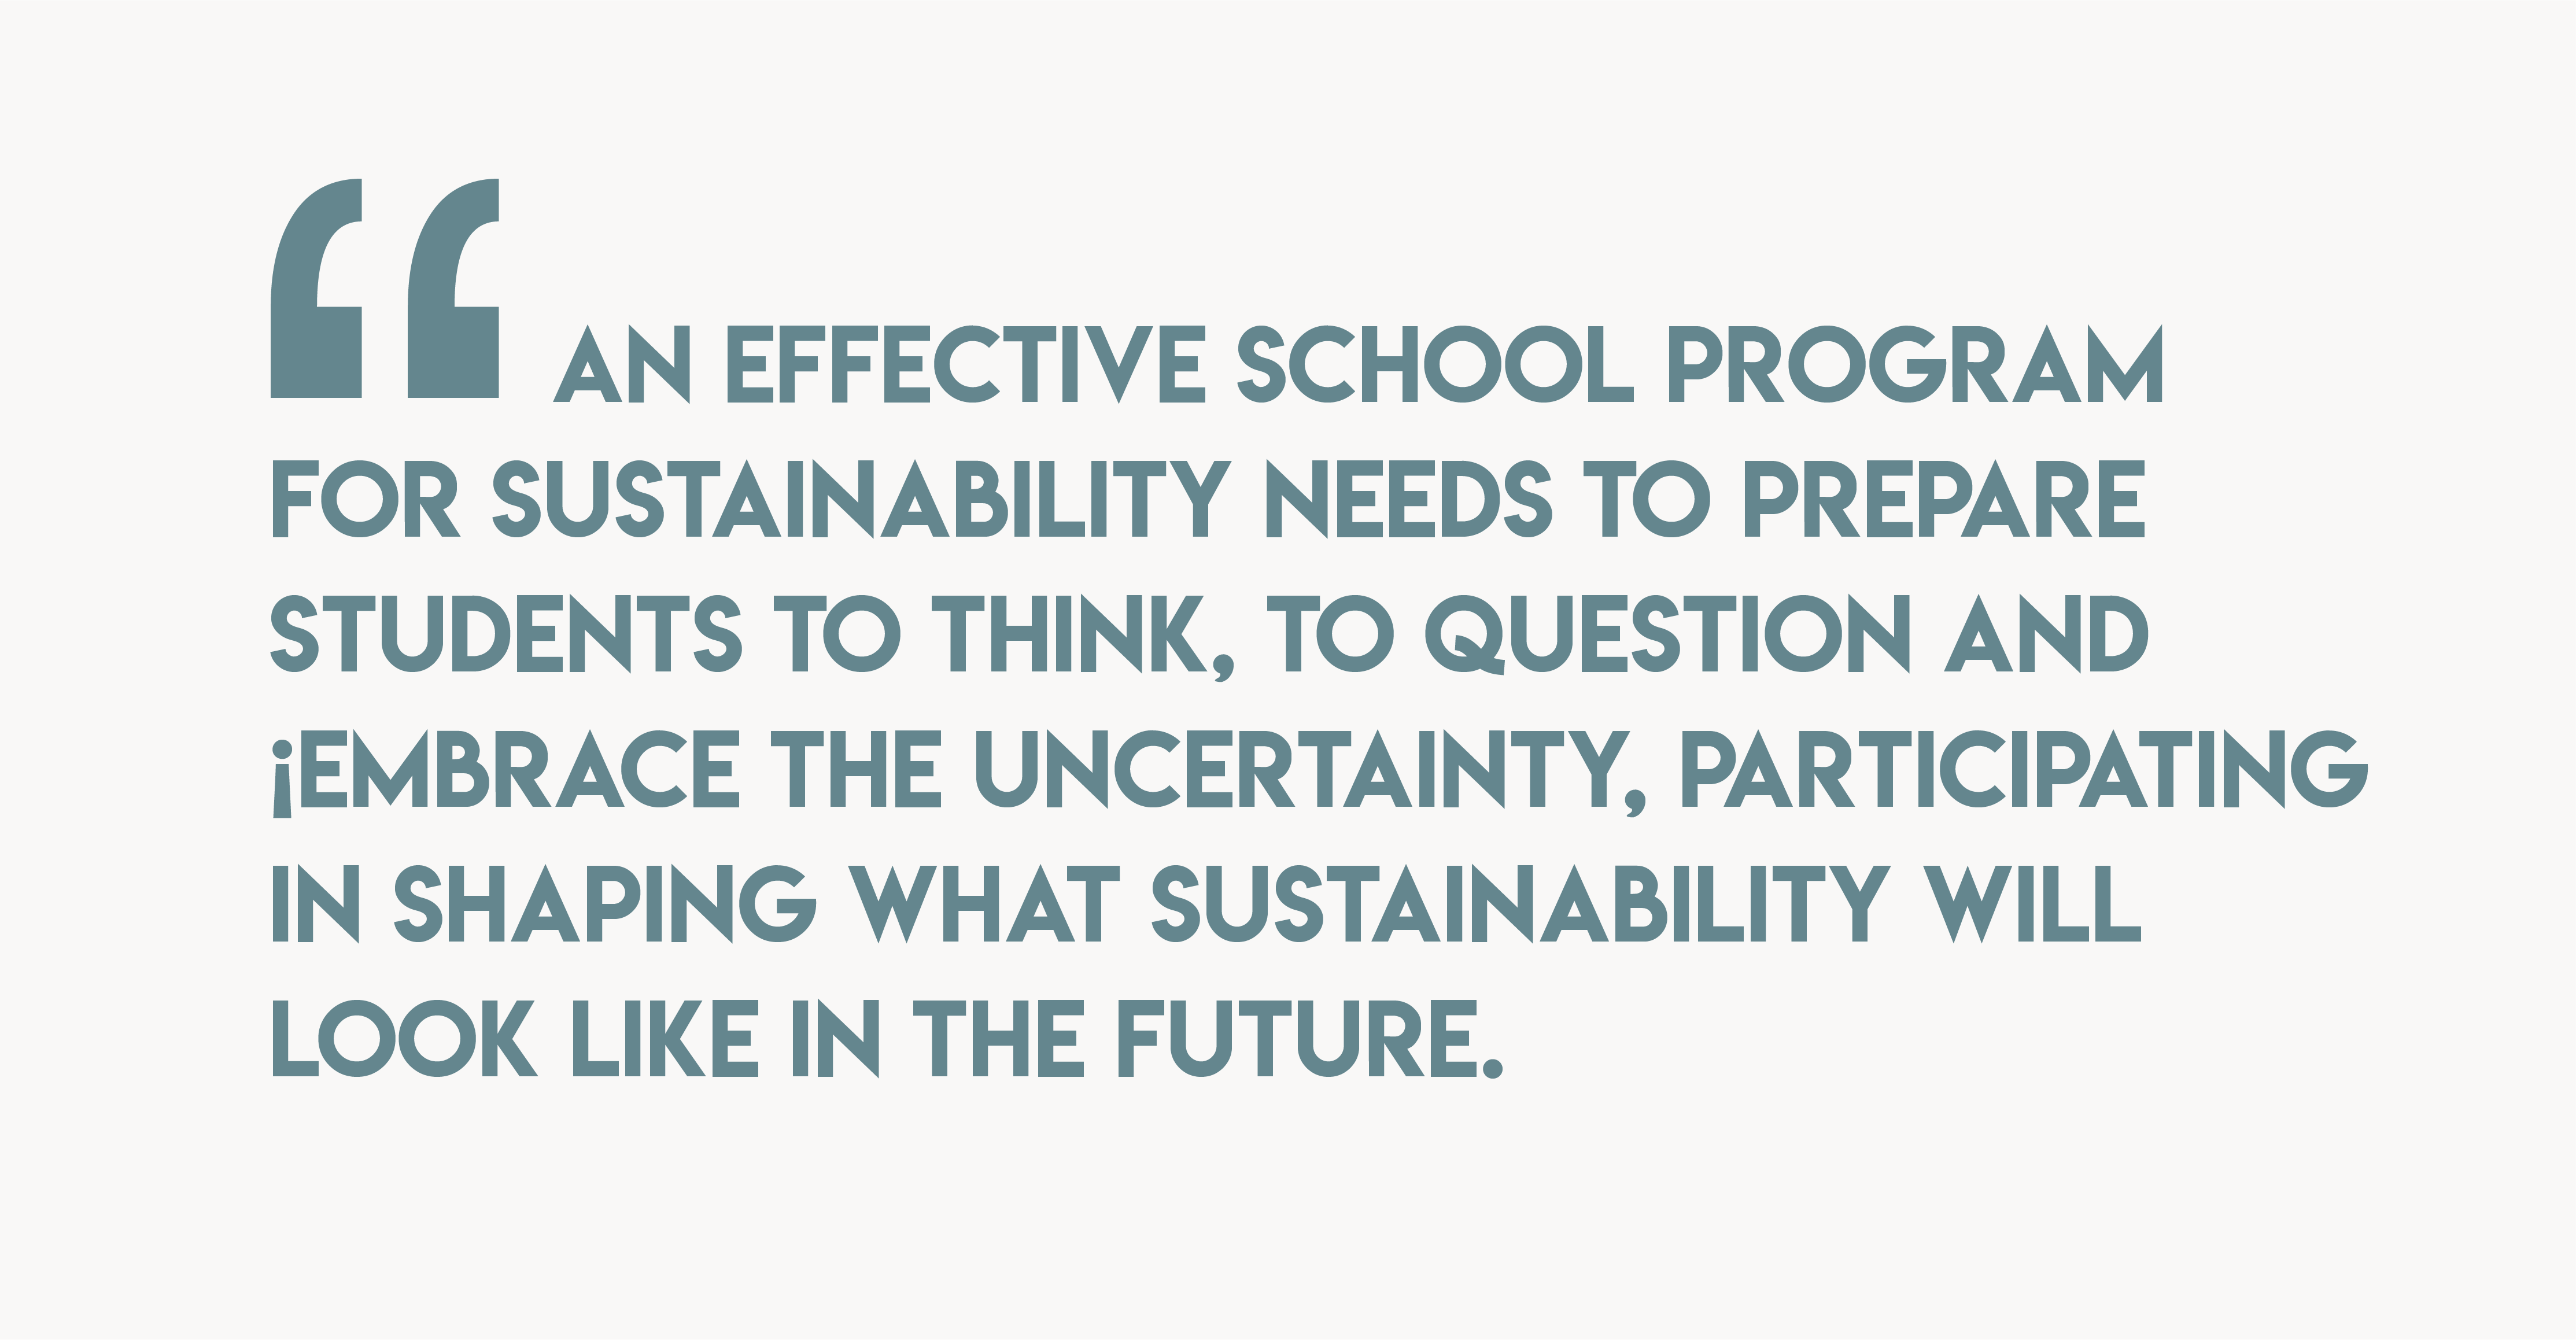 Quote by Claudia Tridapalli, An effective school program for sustainability needs to prepare students to think, question, and embrace the uncertainty, participating in shaping what sustainability will look like in the future.